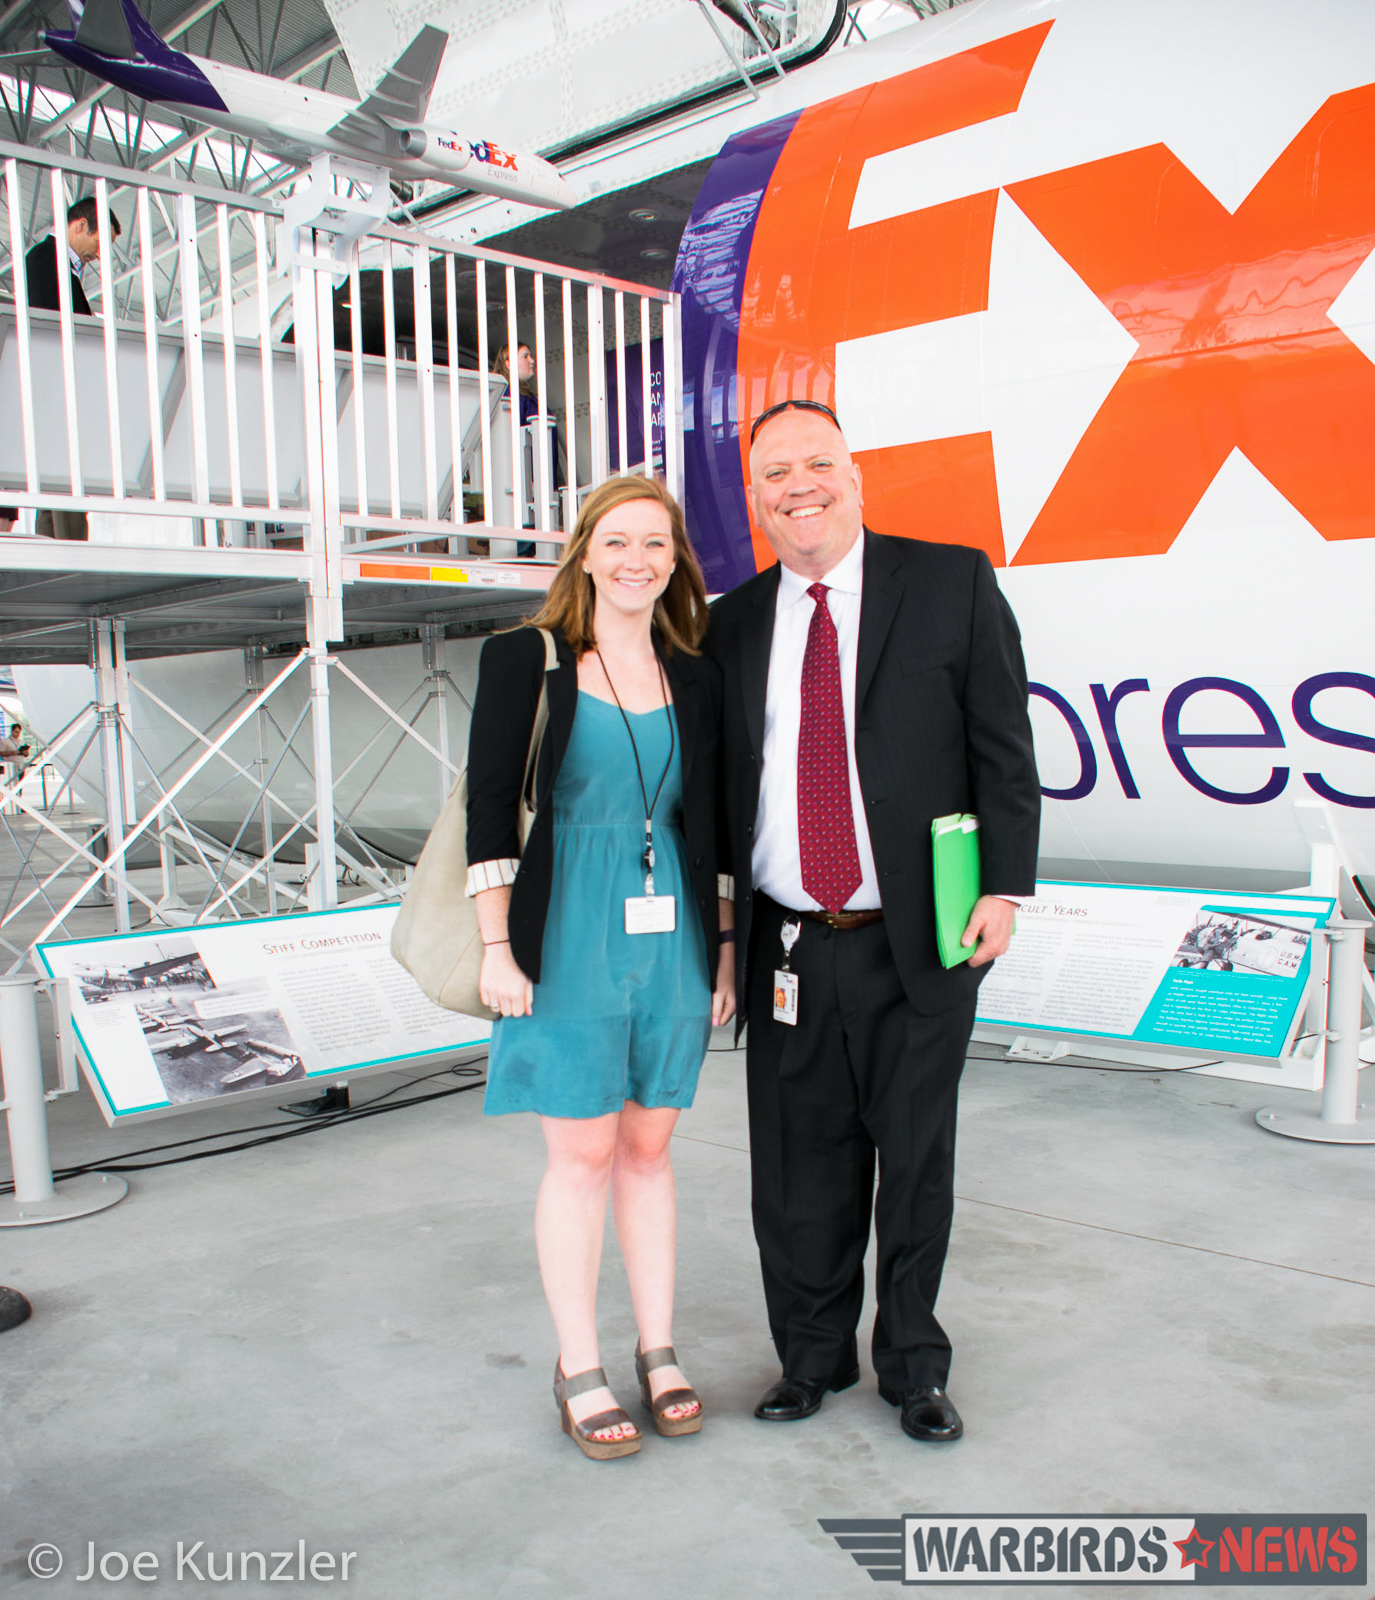 Mary K. Patterson and William M. Bielskis of FedEx Communications in front of their exhibit. (photo by Joe Kunzler)